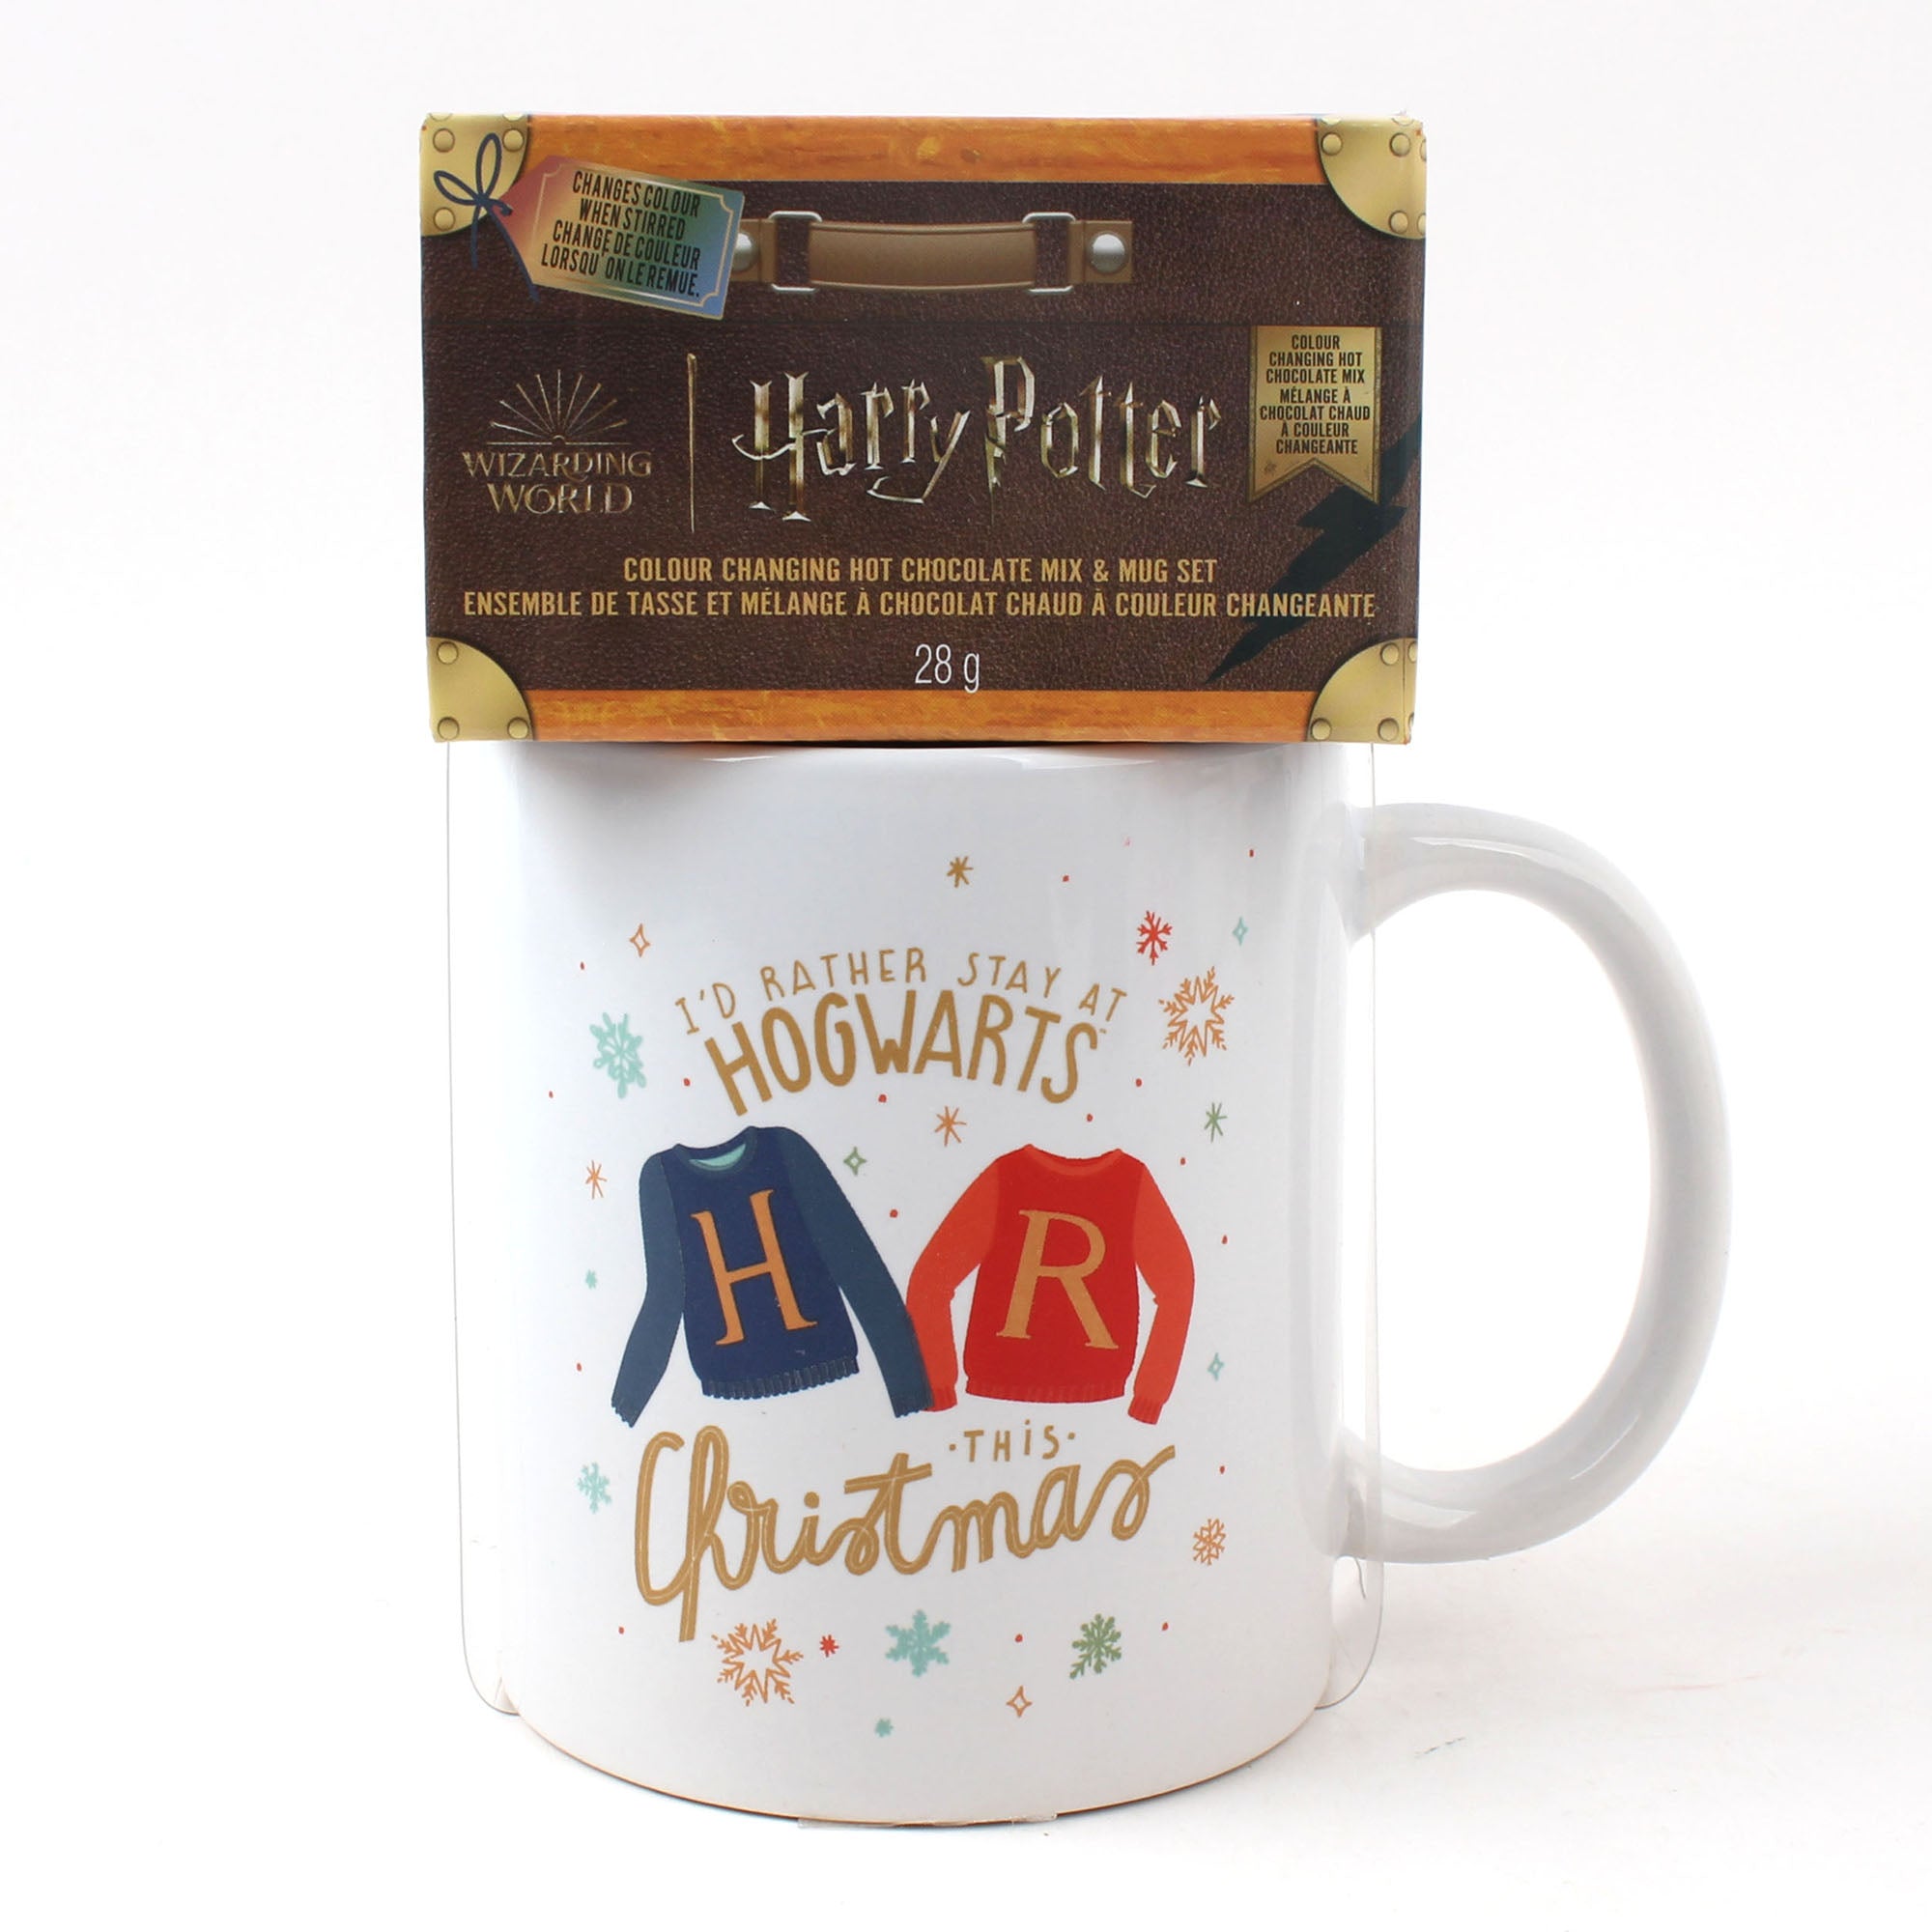 Harry Potter Mug with Colour Changing Hot Chocolate Mix – Giant Tiger